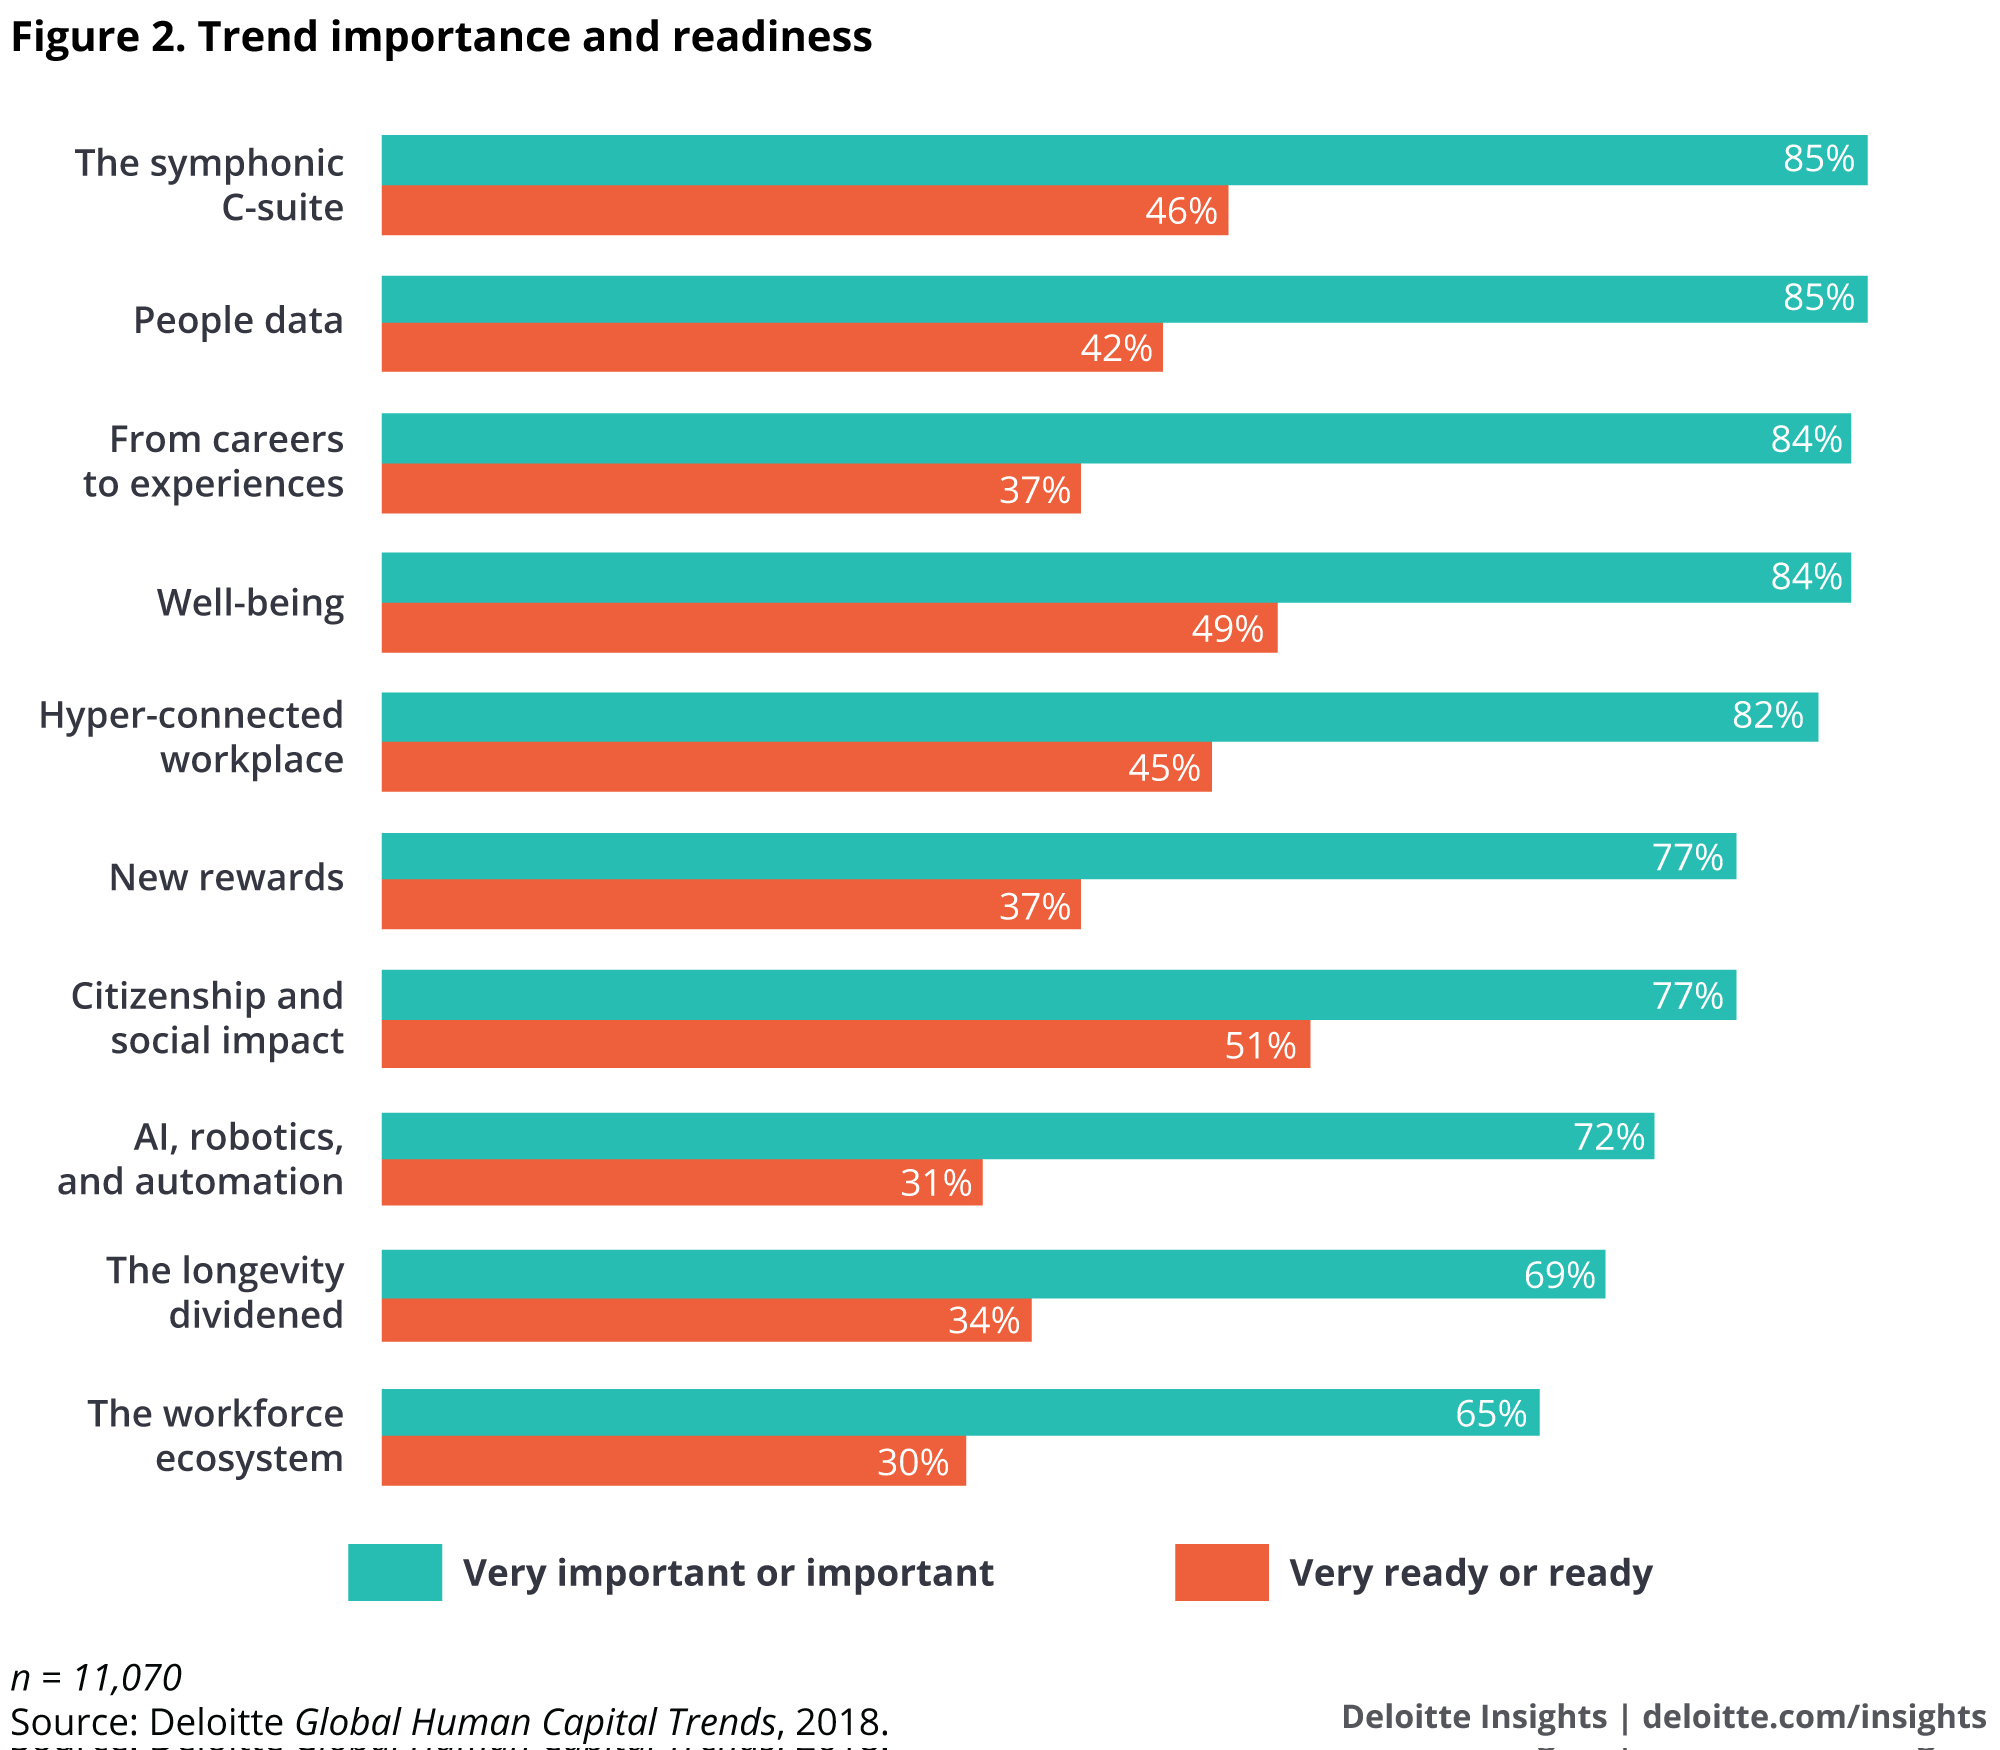 Trend importance and readiness